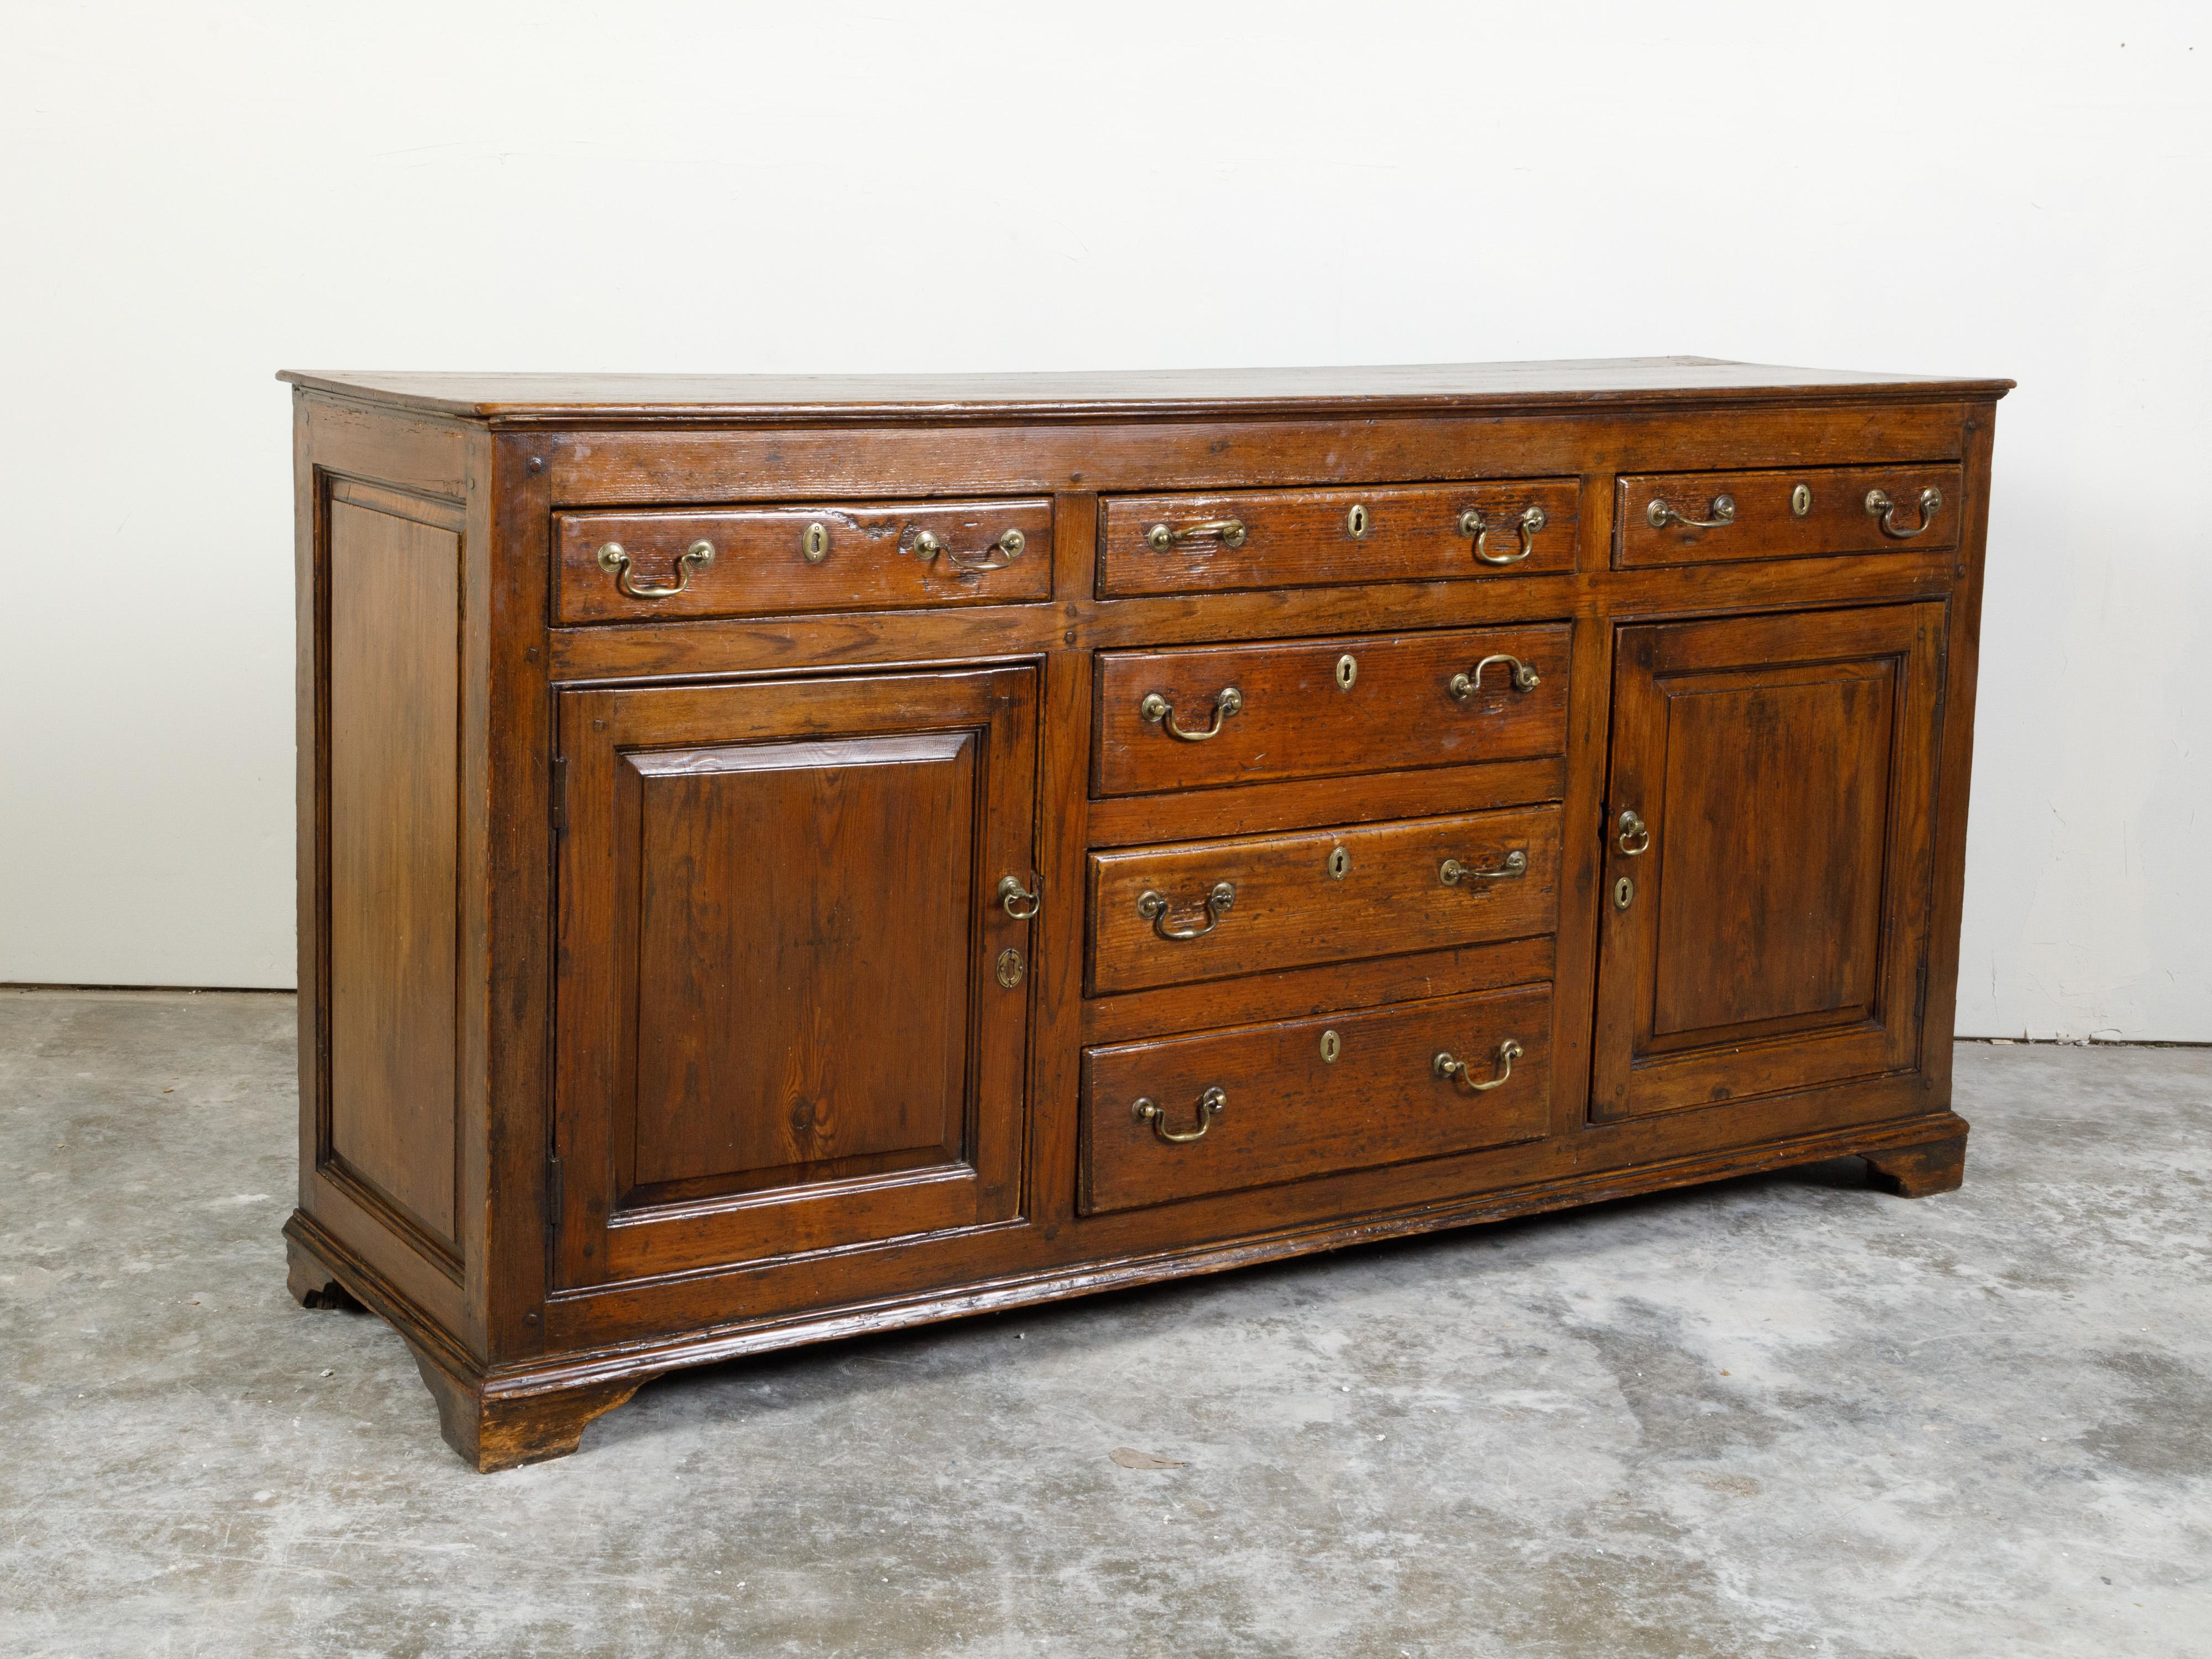 19th Century English Georgian Period 1800s Oak Dresser Base with Six Drawers and Two Doors